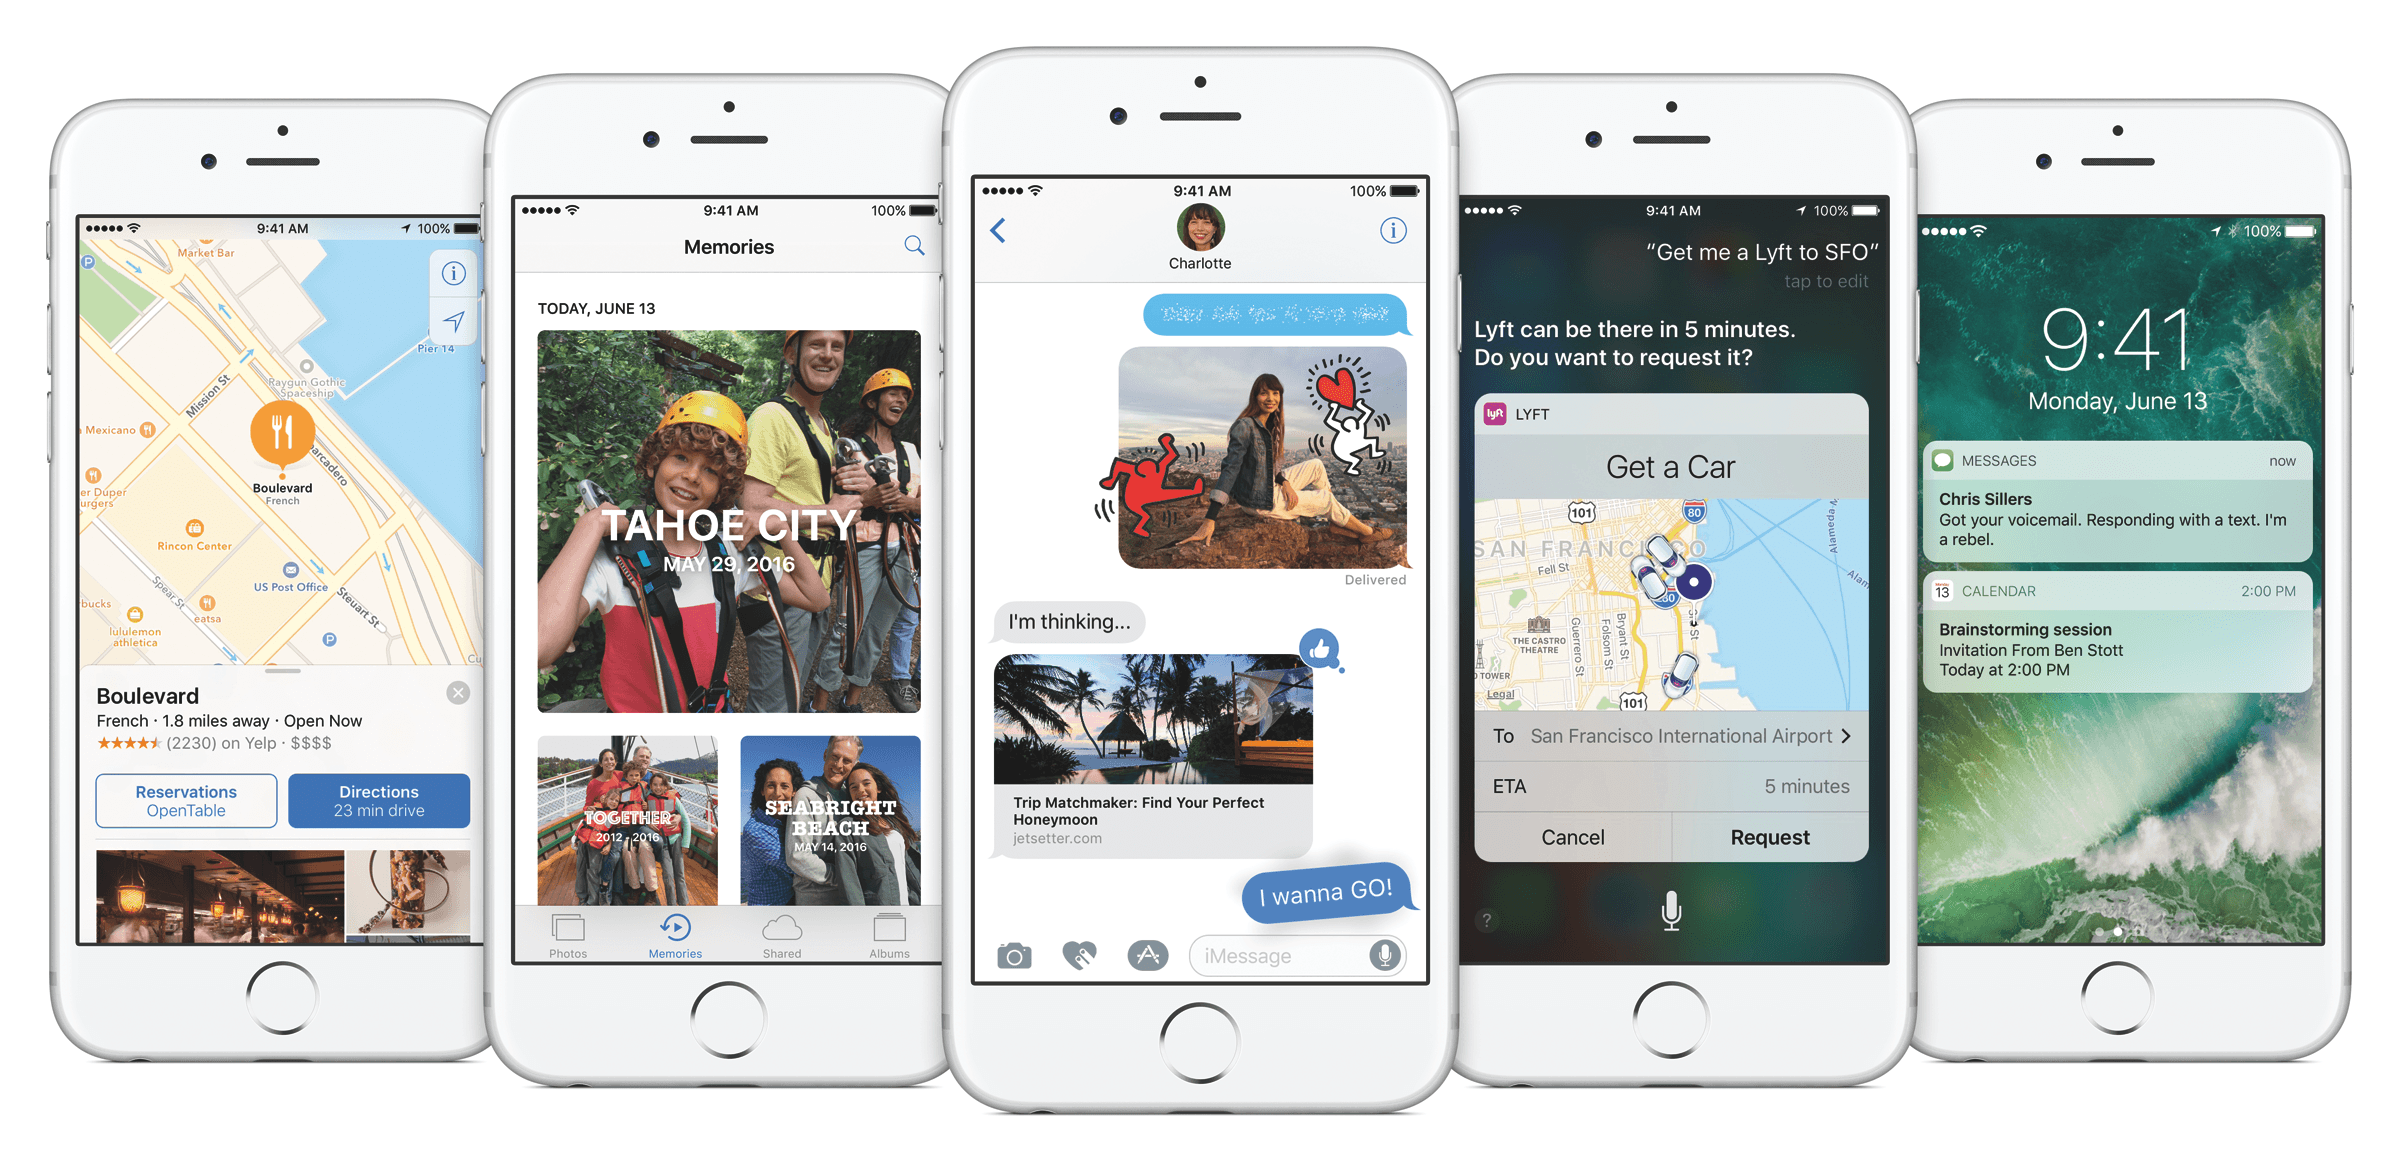 iOS 10.0 Public Beta Thoughts